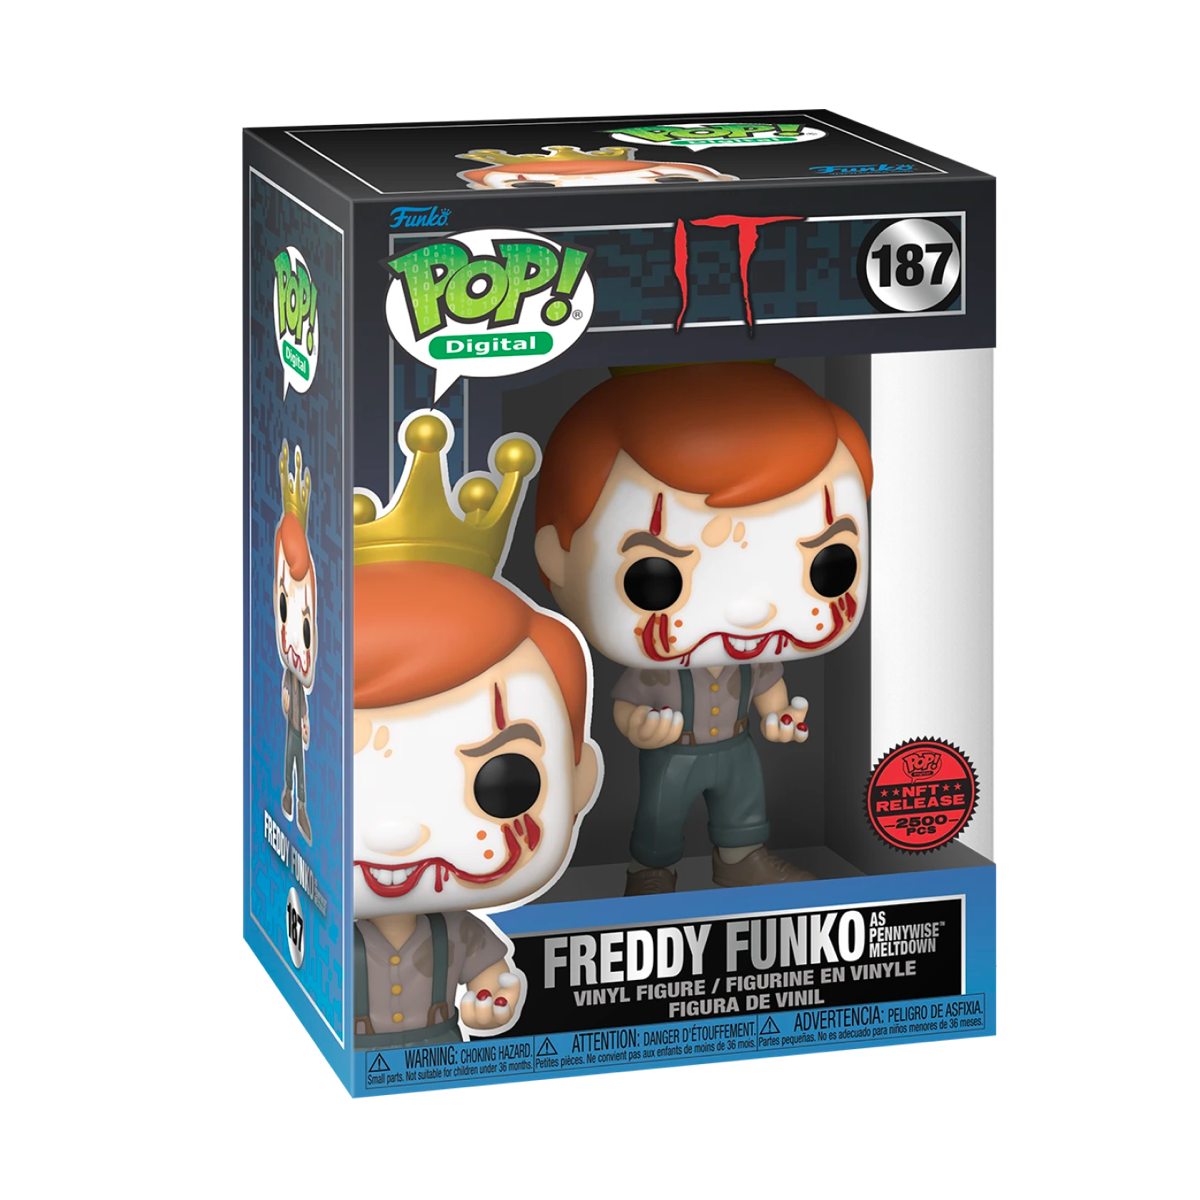 FREDDY FUNKO AS PENNYWISE MELTDOWN EXCLUSIVE LE2500 FUNKO POP ROYALTY NFT PHYSICAL REDEEMABLE IT #187 PRE ORDER Q2/Q3 2024